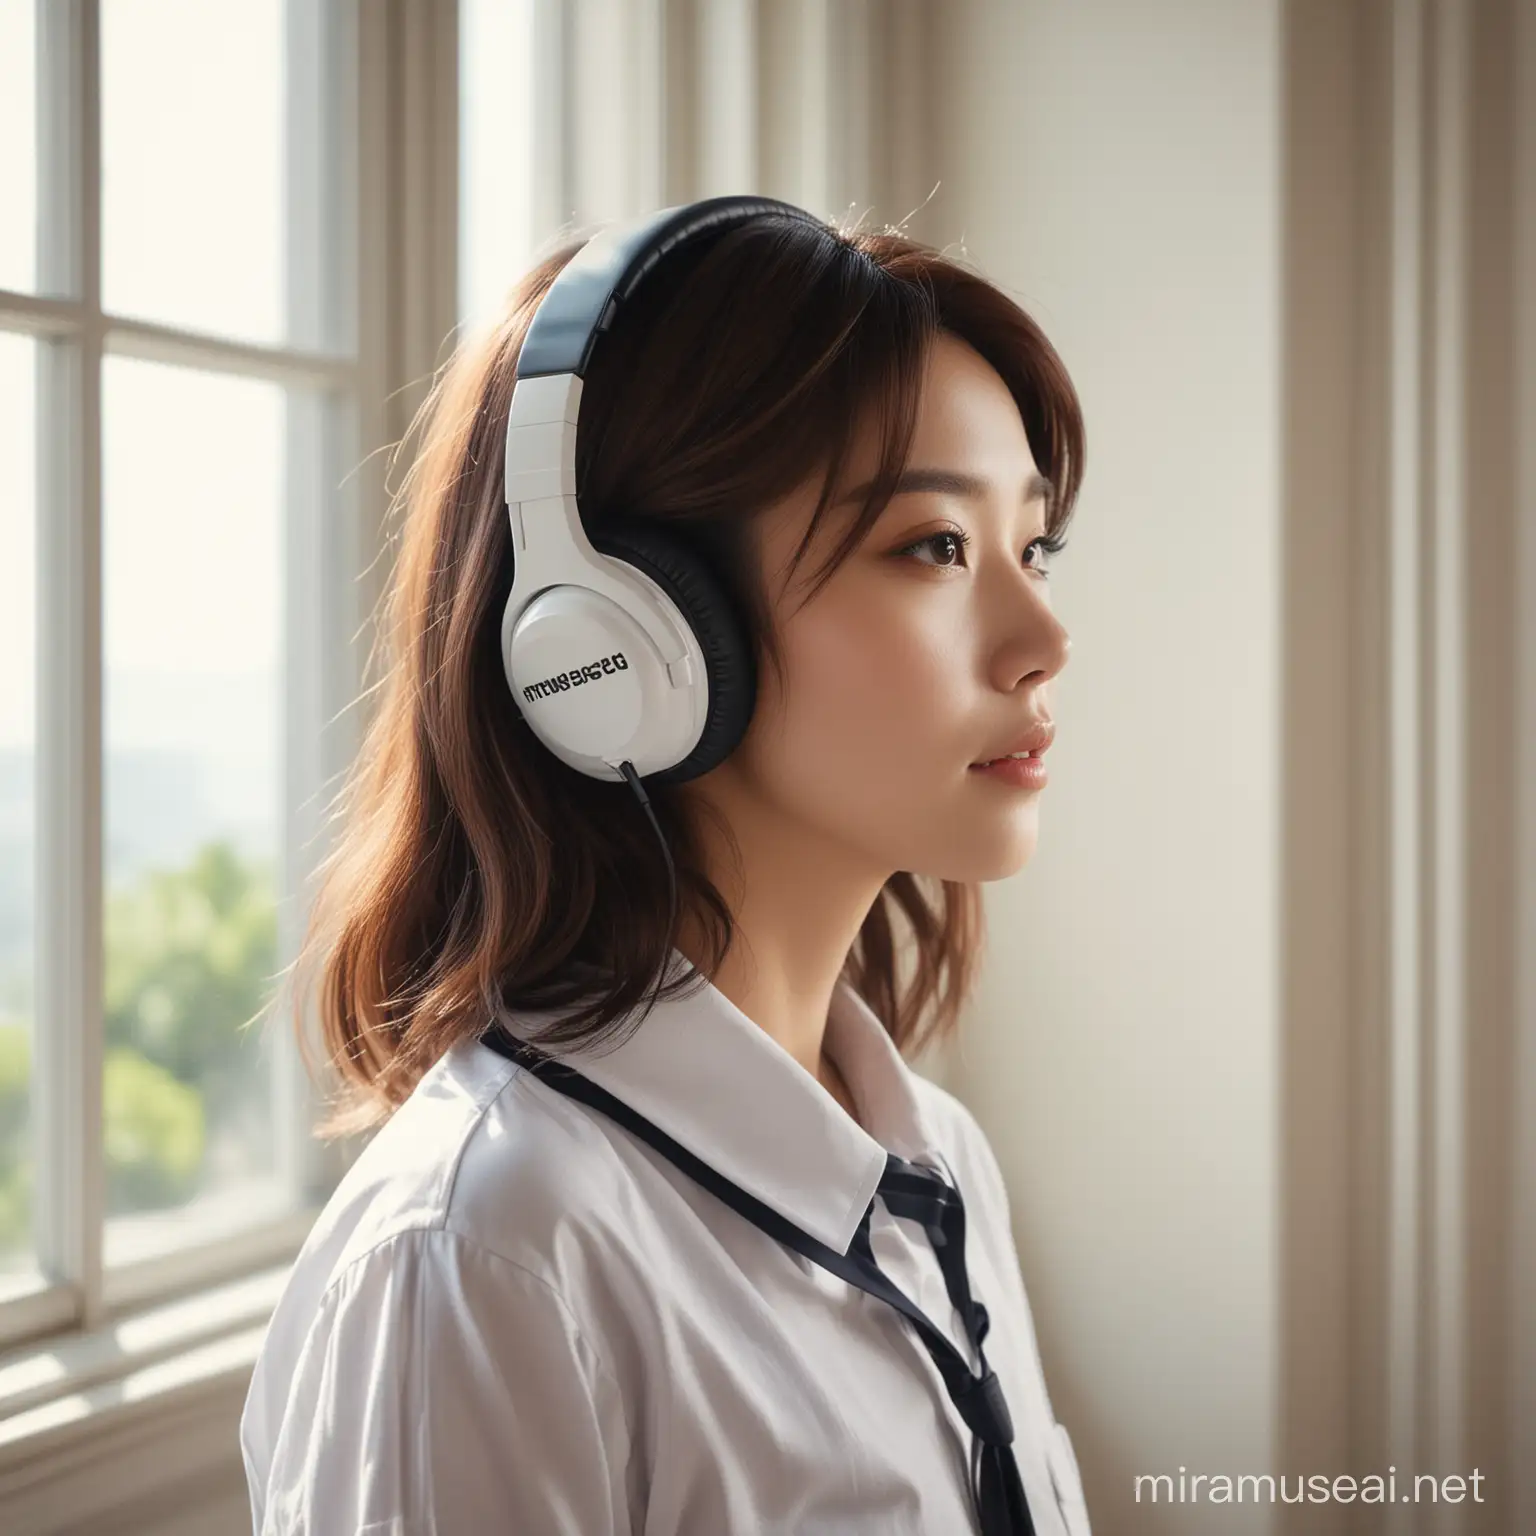 Photorealistic illustration of a contemplative k-pop girl with a monster beat headset, bathed in natural sunlight in a large room, looking out of a window, peaceful and dreamy expression, high quality, photorealism, K-pop style, vintage, contemplative mood, peaceful atmosphere, natural lighting, large room, detailed facial expression, vintage headset, bright sunshine, serene, happy, thoughtful gaze, ,wear salior school uniform